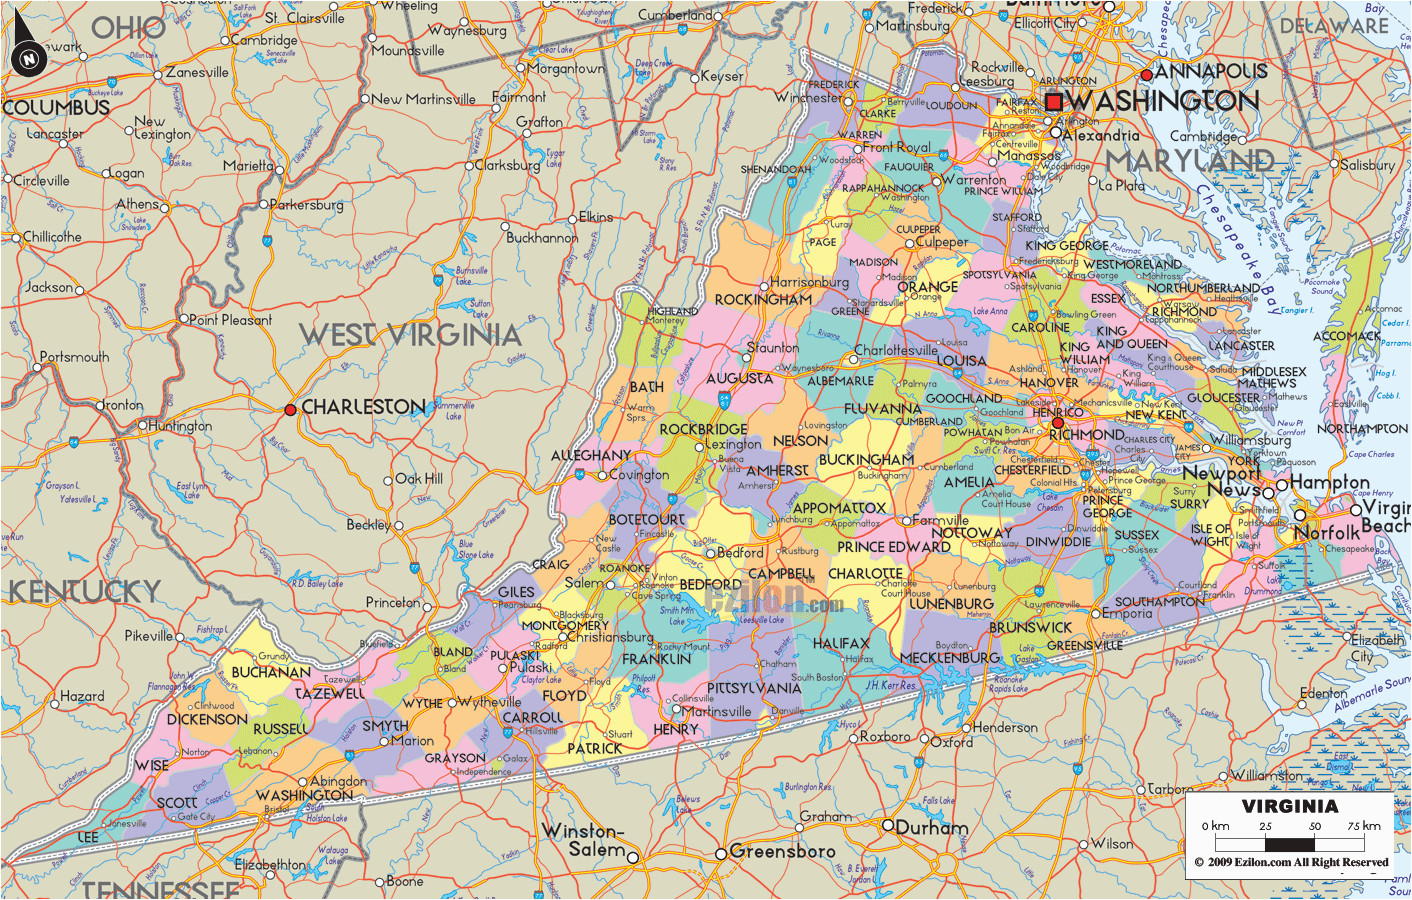 map of state of virginia with outline of the state cities